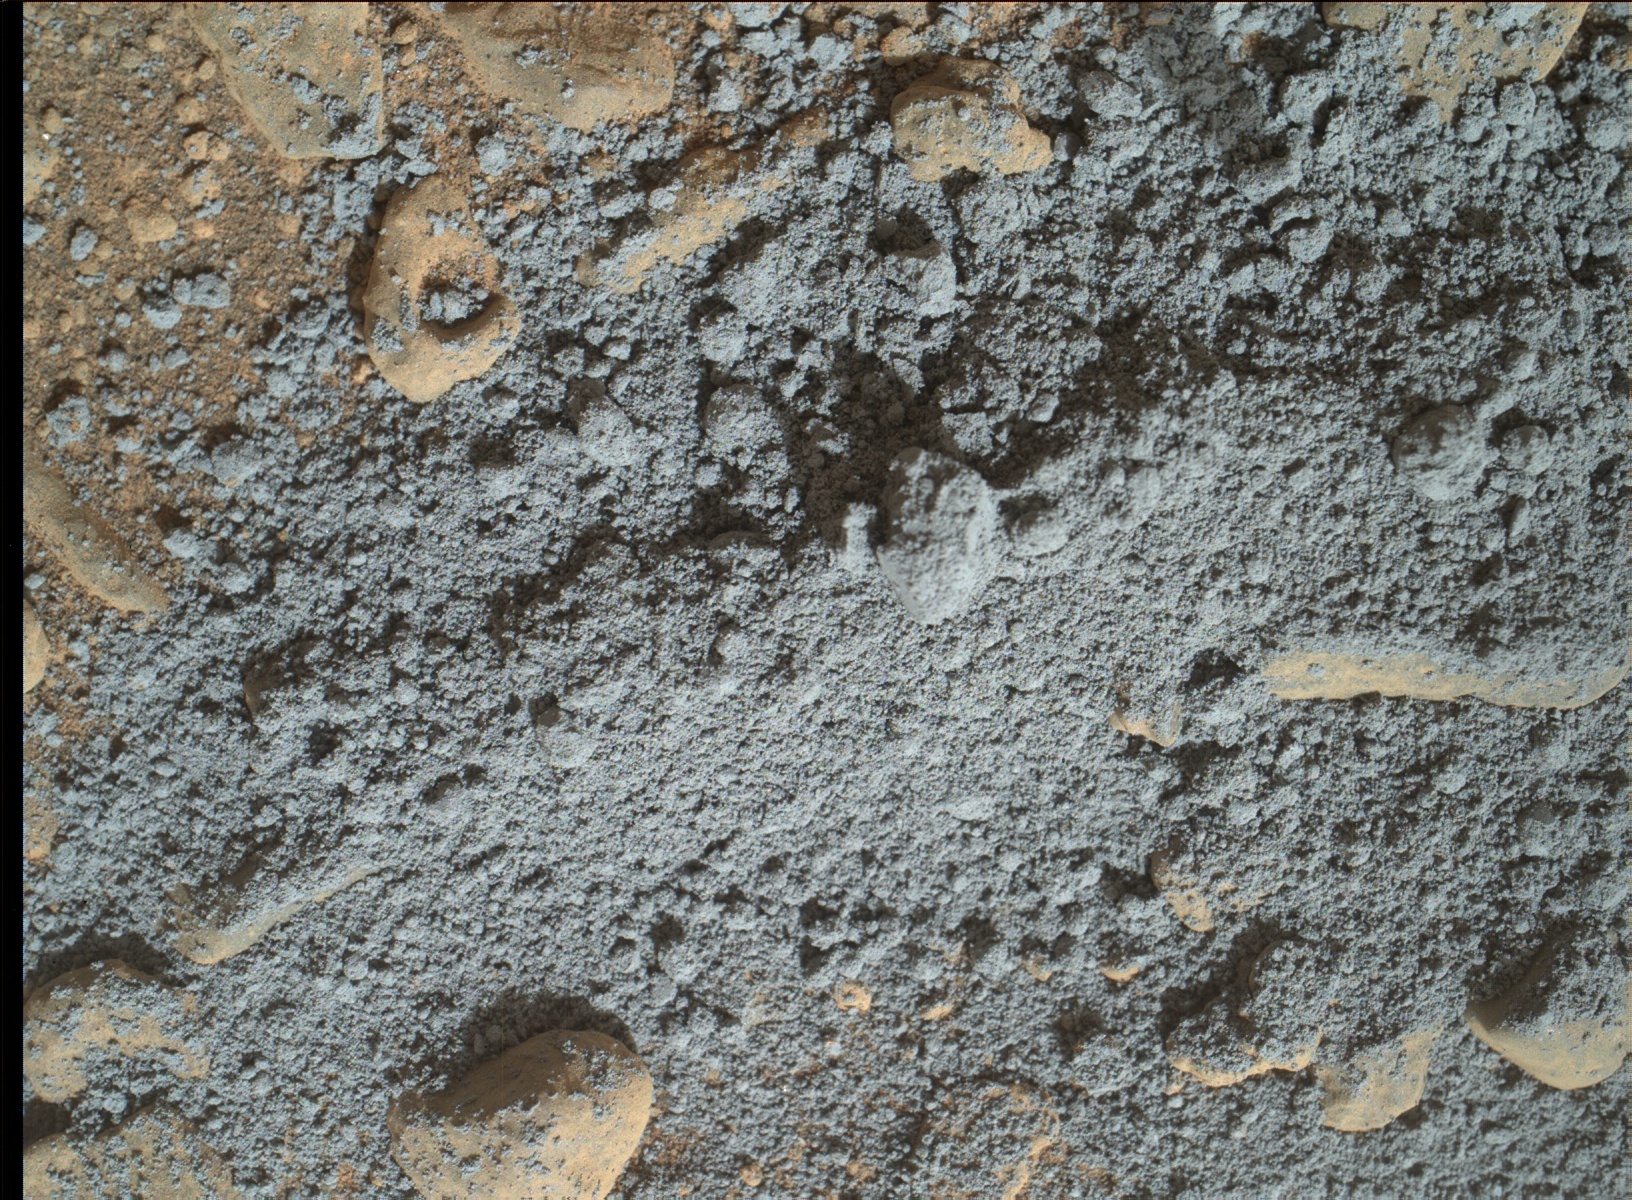 Nasa's Mars rover Curiosity acquired this image using its Mars Hand Lens Imager (MAHLI) on Sol 954